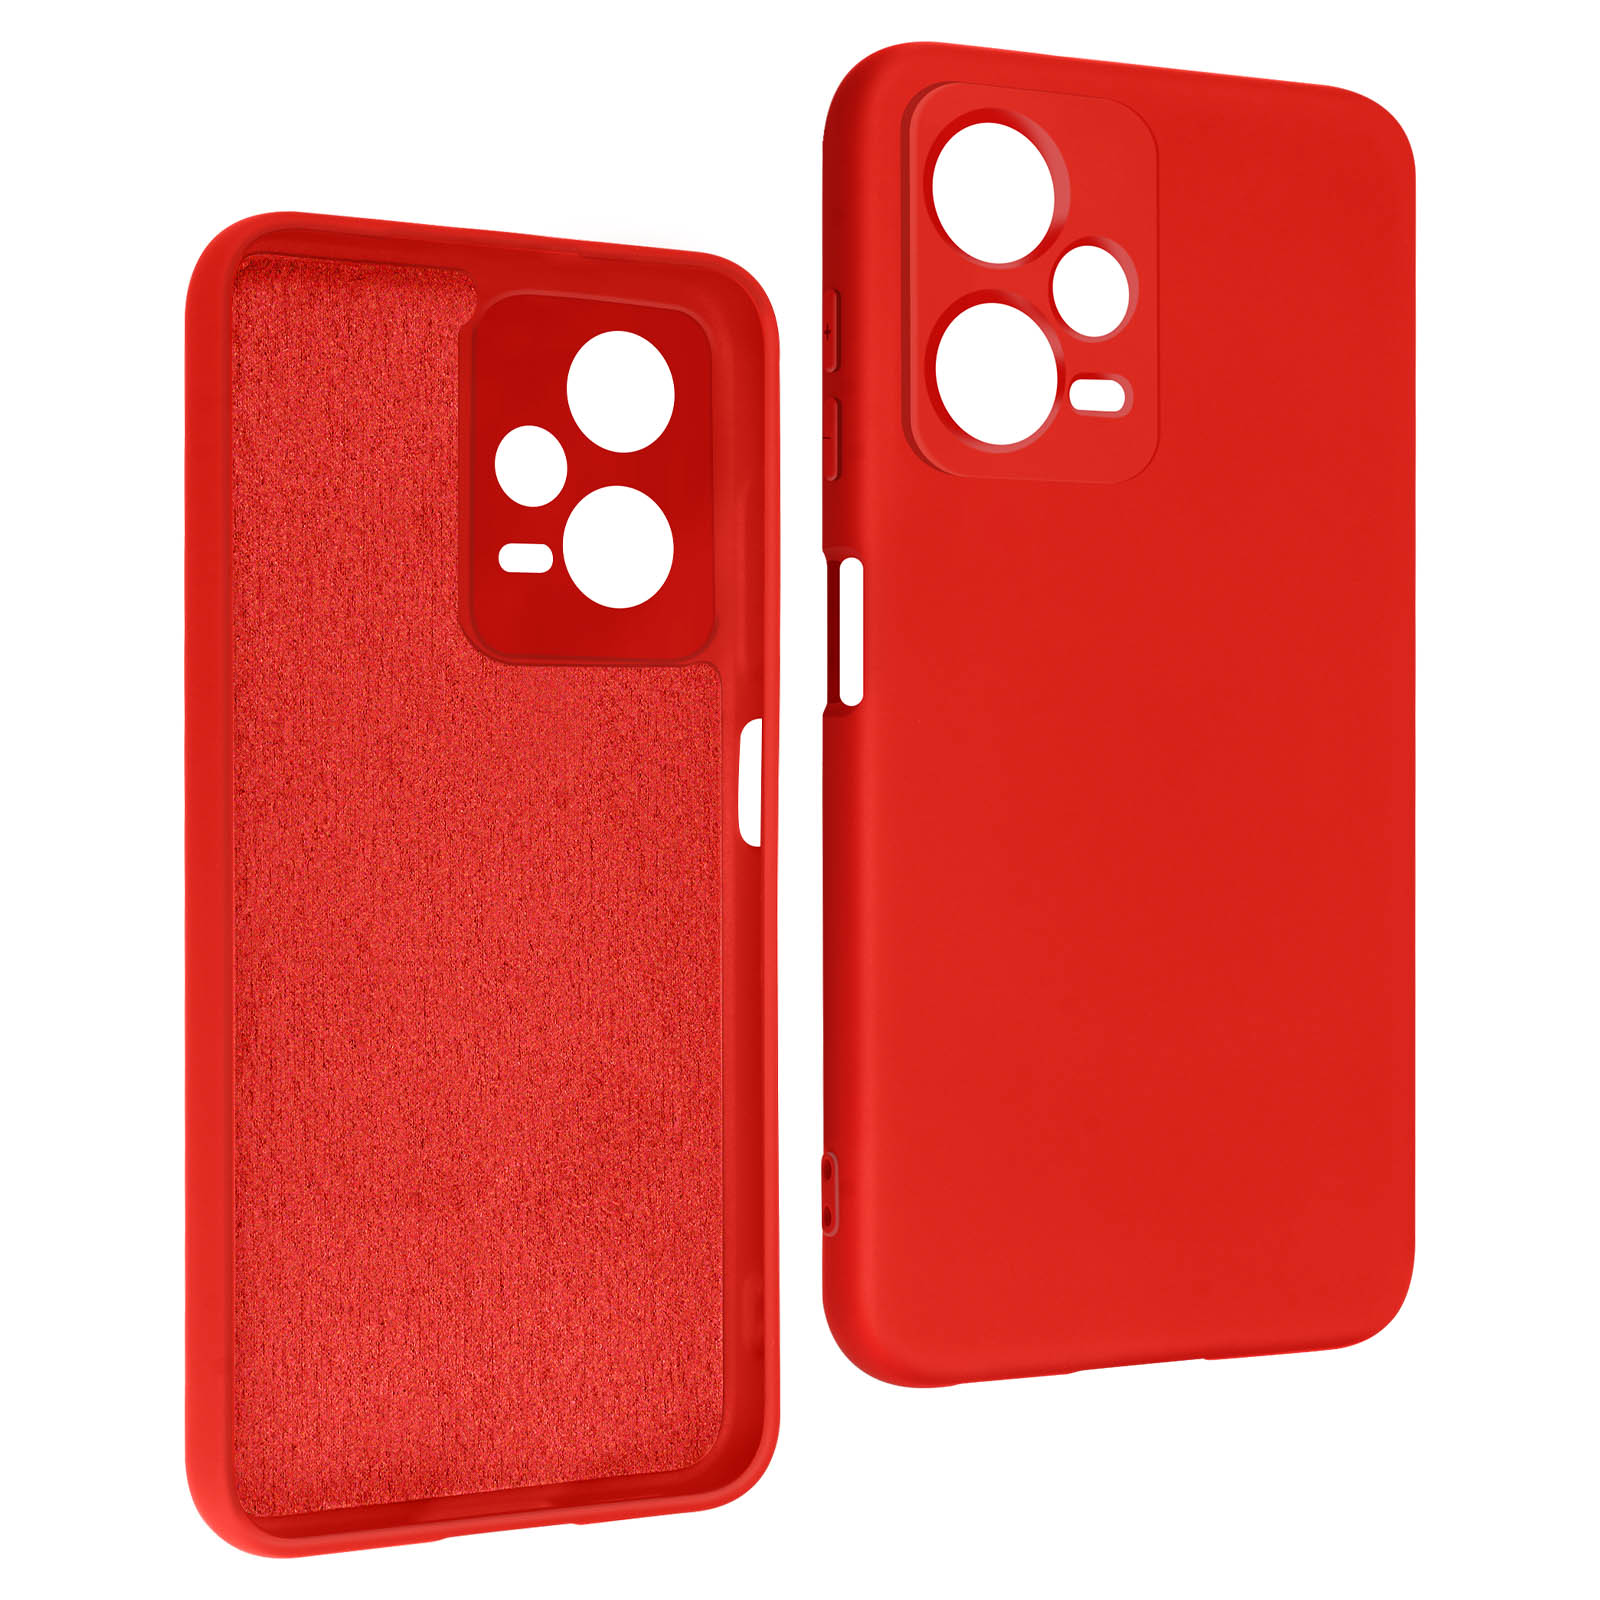 12 Redmi Likid Note Backcover, Rot Pro Xiaomi, AVIZAR 5G, Series,